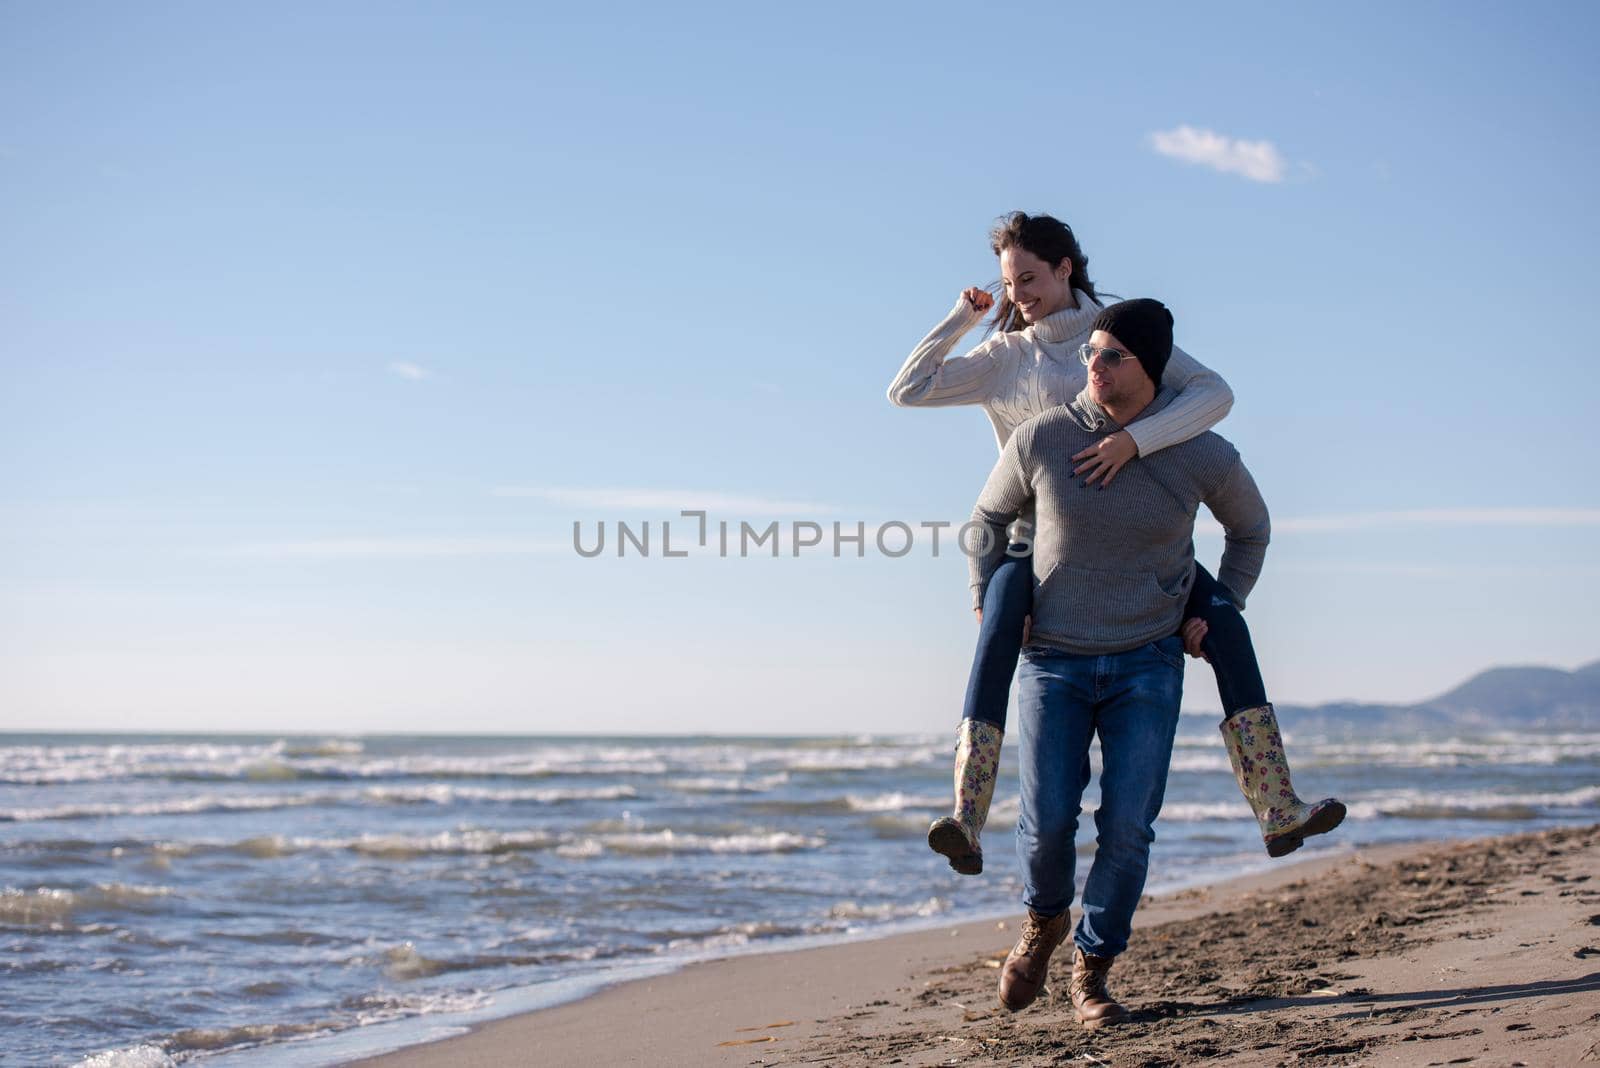 Men Giving Piggy Back Rides his girlfriend At Sunset By The Sea, autumn time